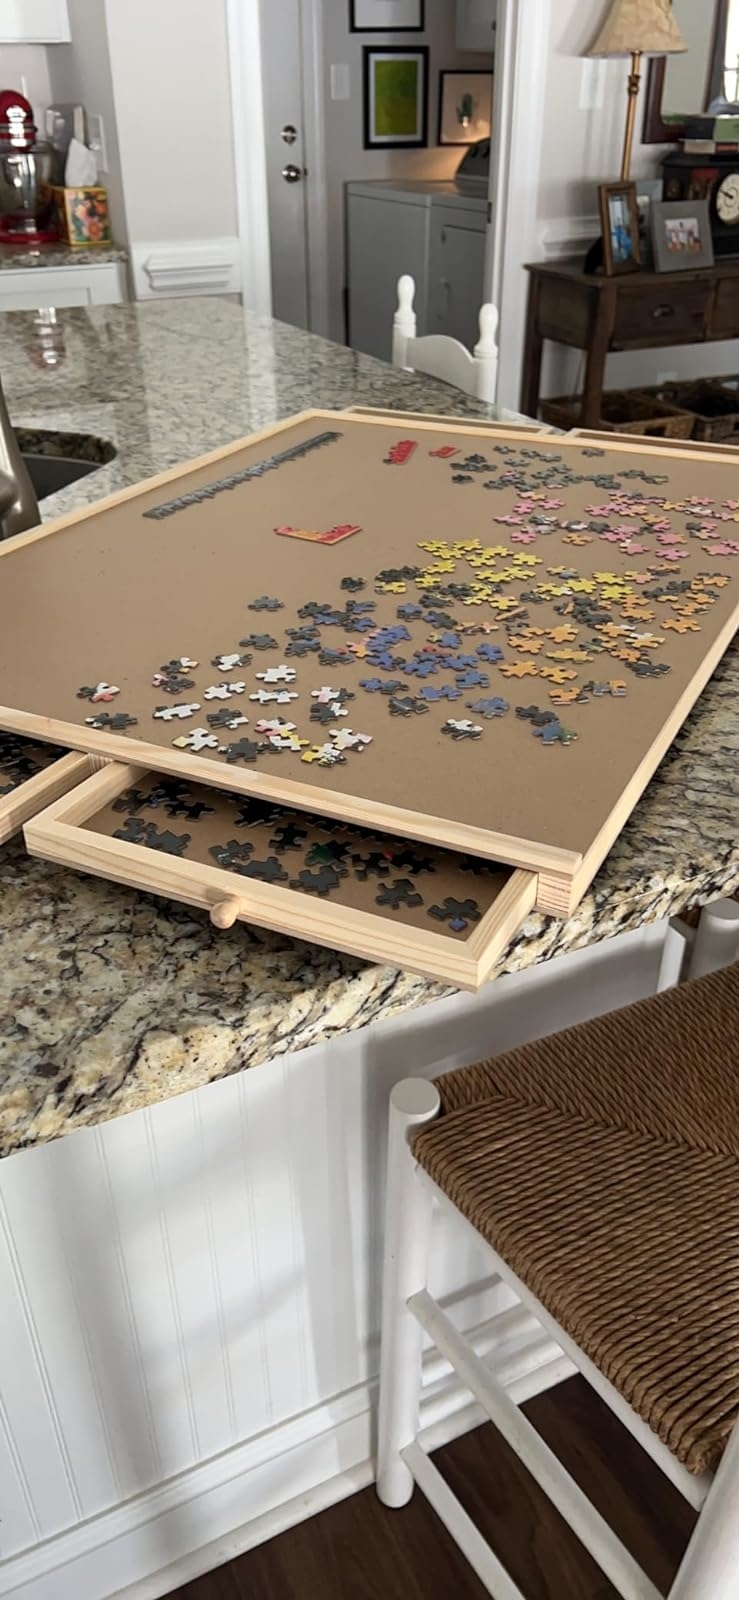 Jigsaw puzzle partially completed on an easel in a home kitchen